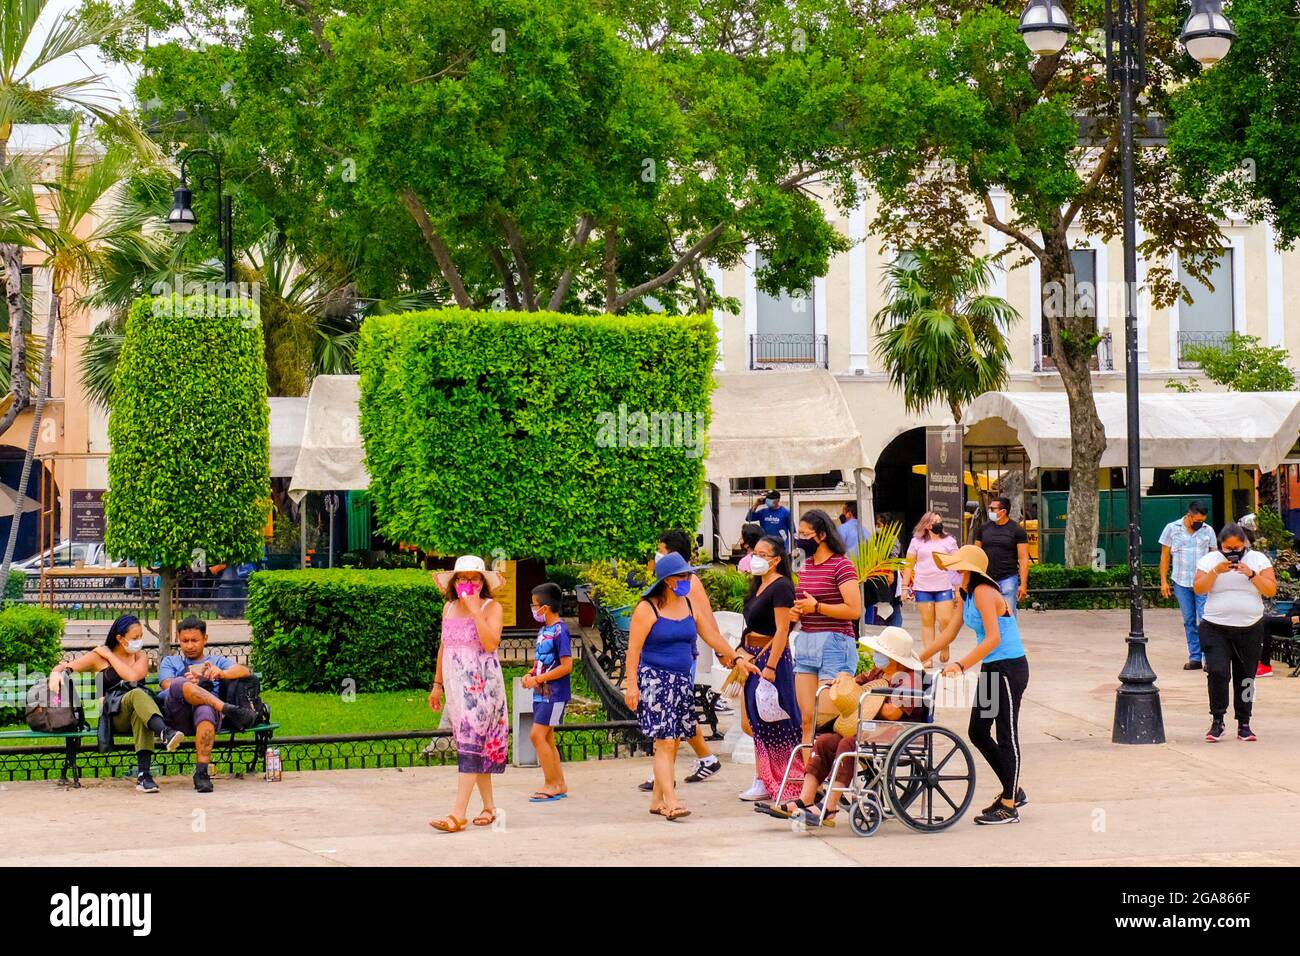 Mexican people in a park in downtown Merida, Mexico during the Covid-19 Global Pandemic Stock Photo